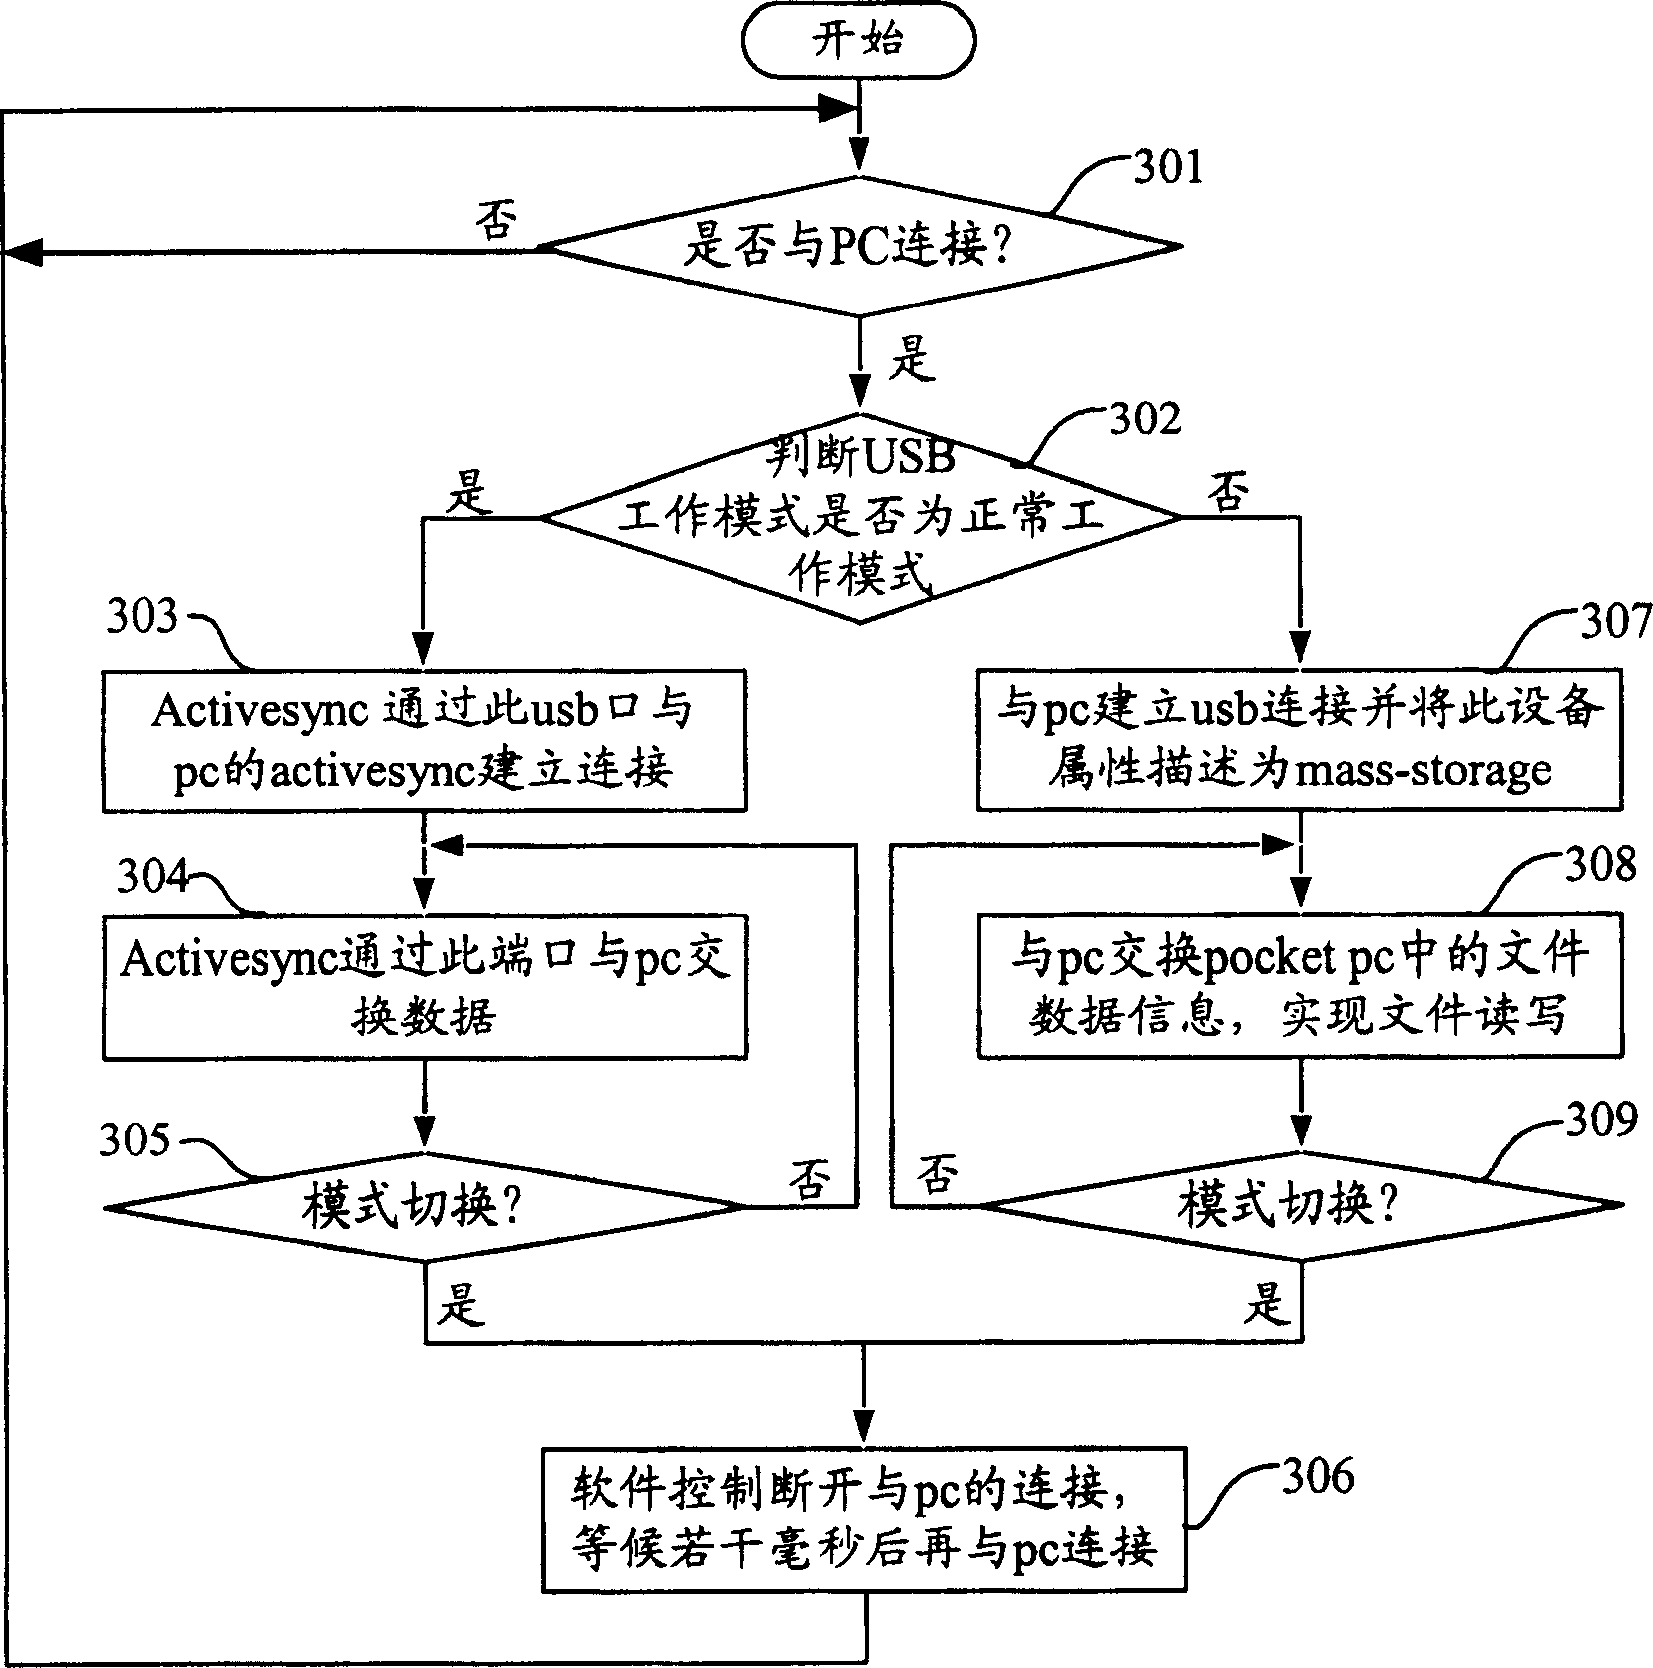 Method for implementing data exchange between PDA and computer